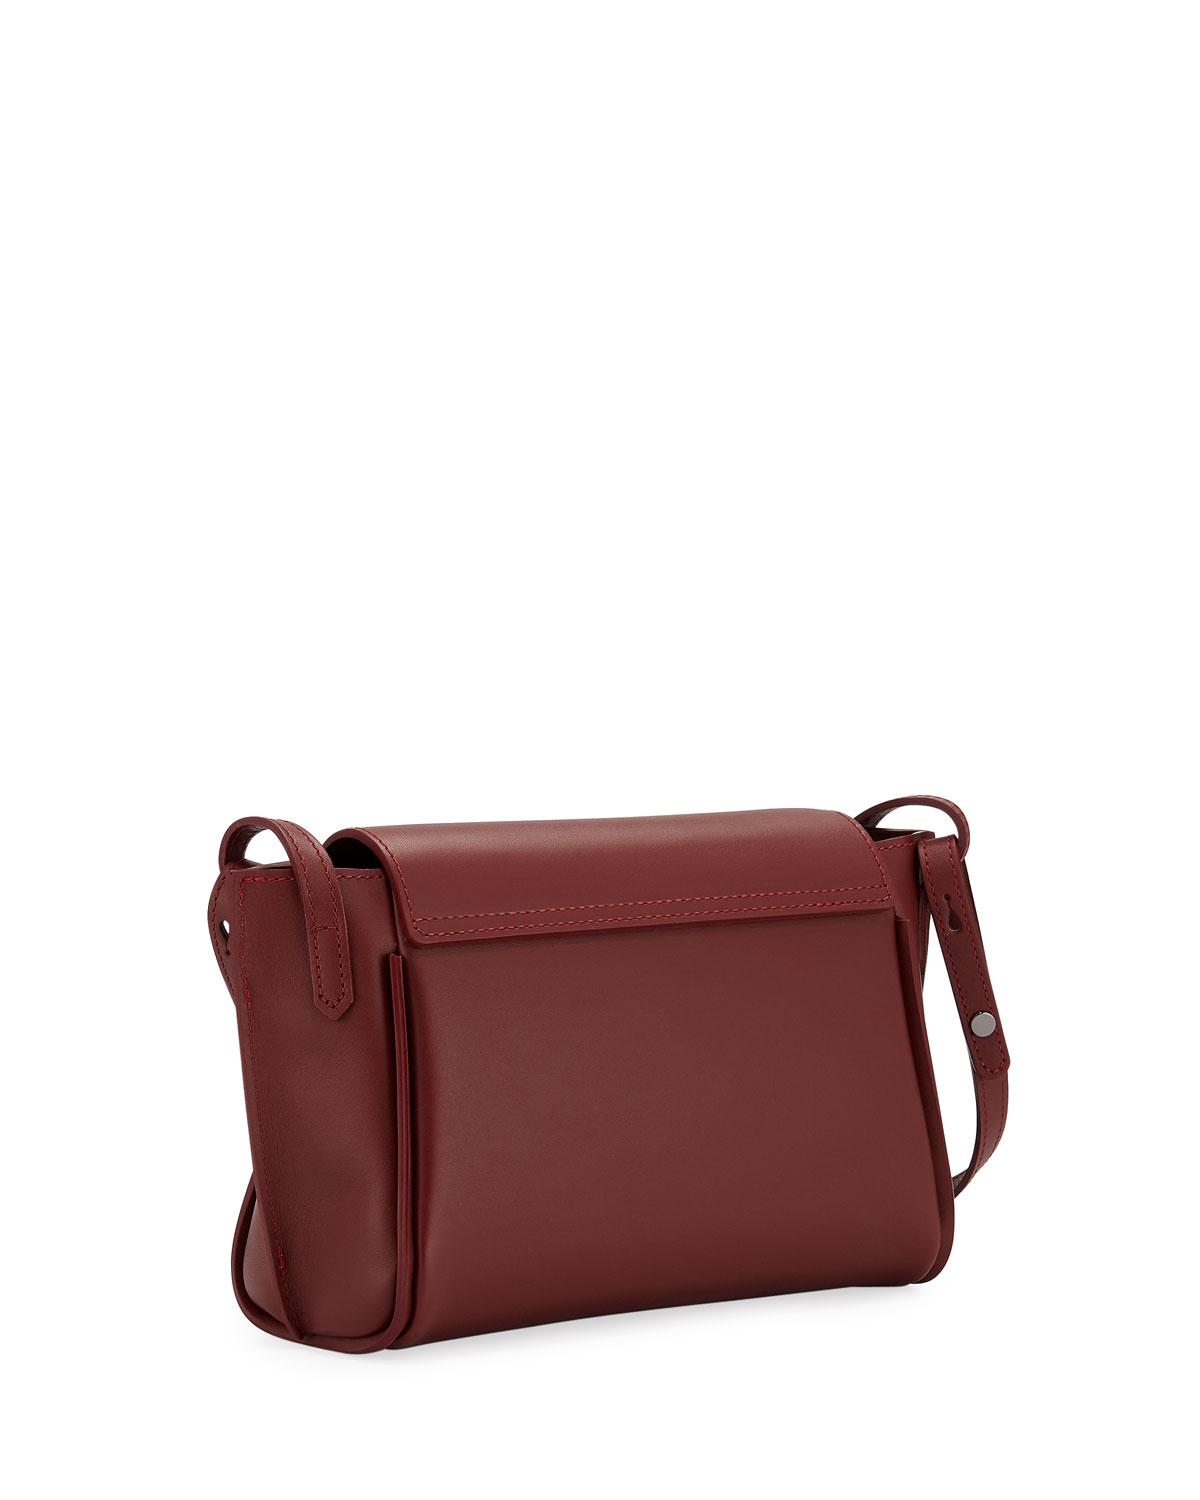 Lyst - Longchamp Penelope Soft Leather Crossbody Bag in Red